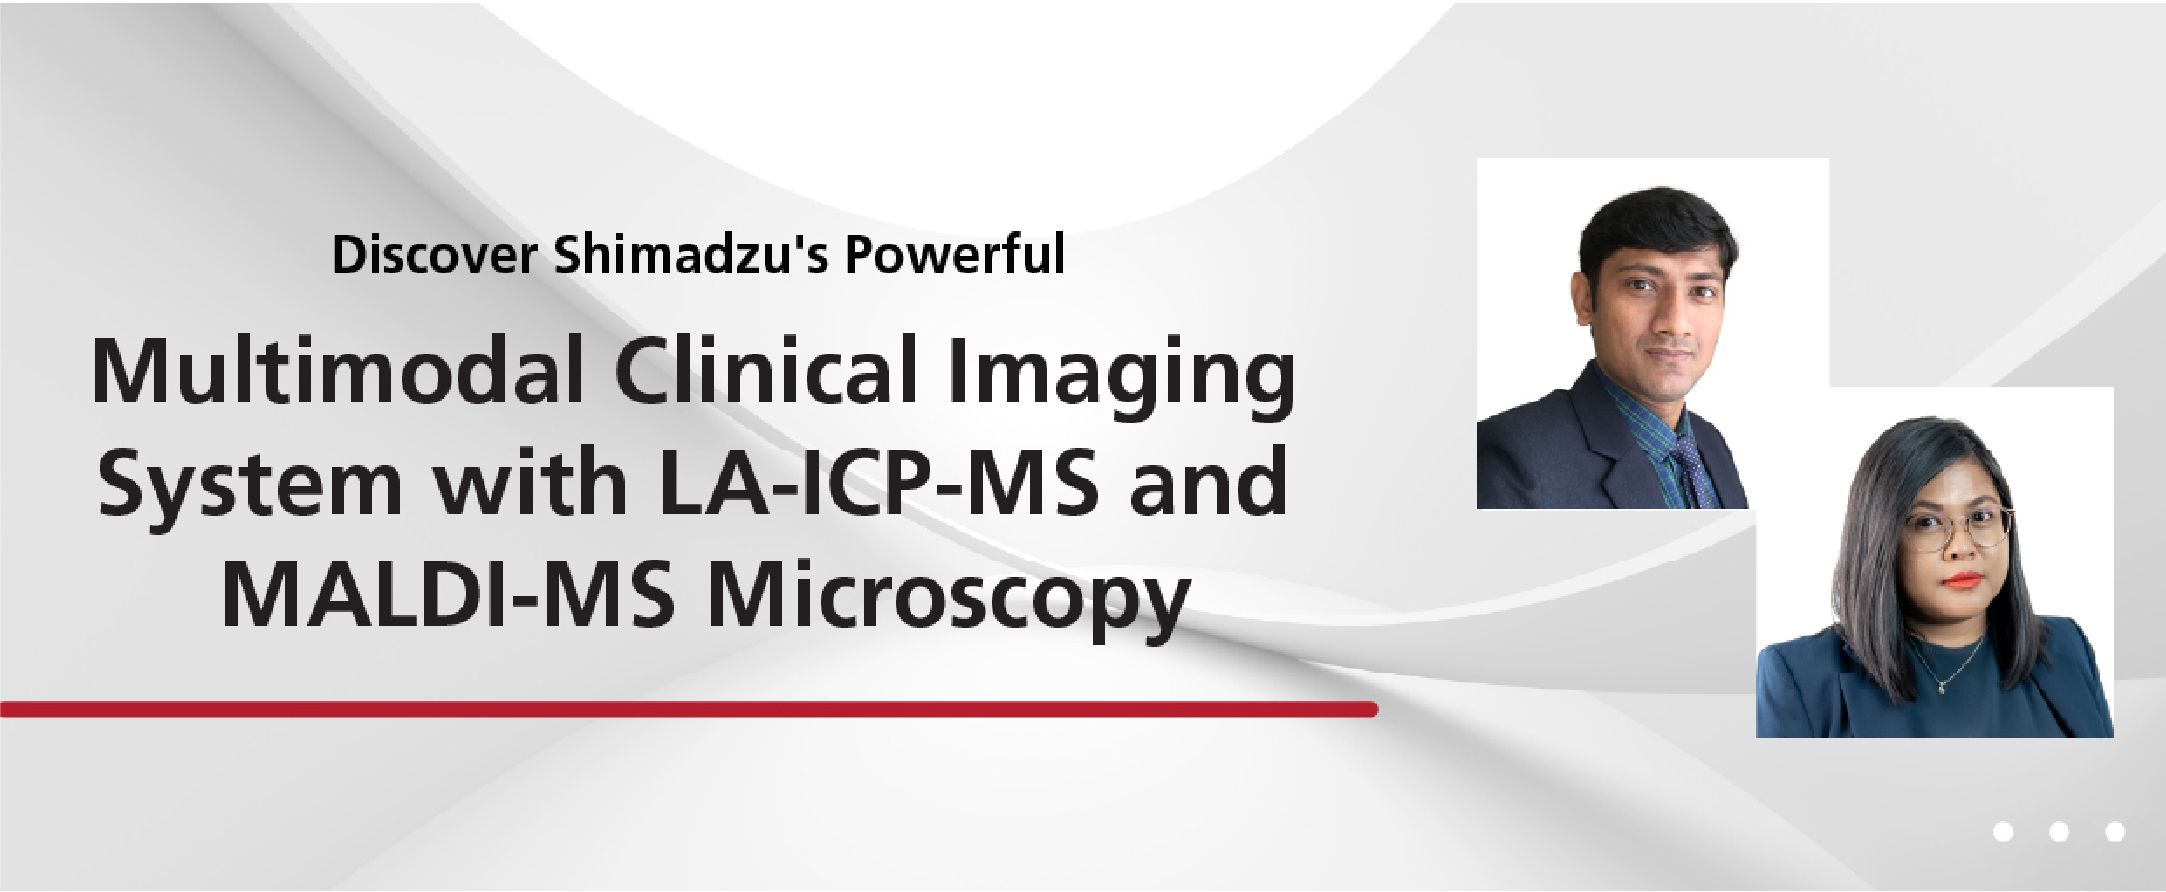 Discover Shimadzu's Powerful Multimodal Clinical Imaging System with LA-ICP-MS and MALDI-MS Microsopy